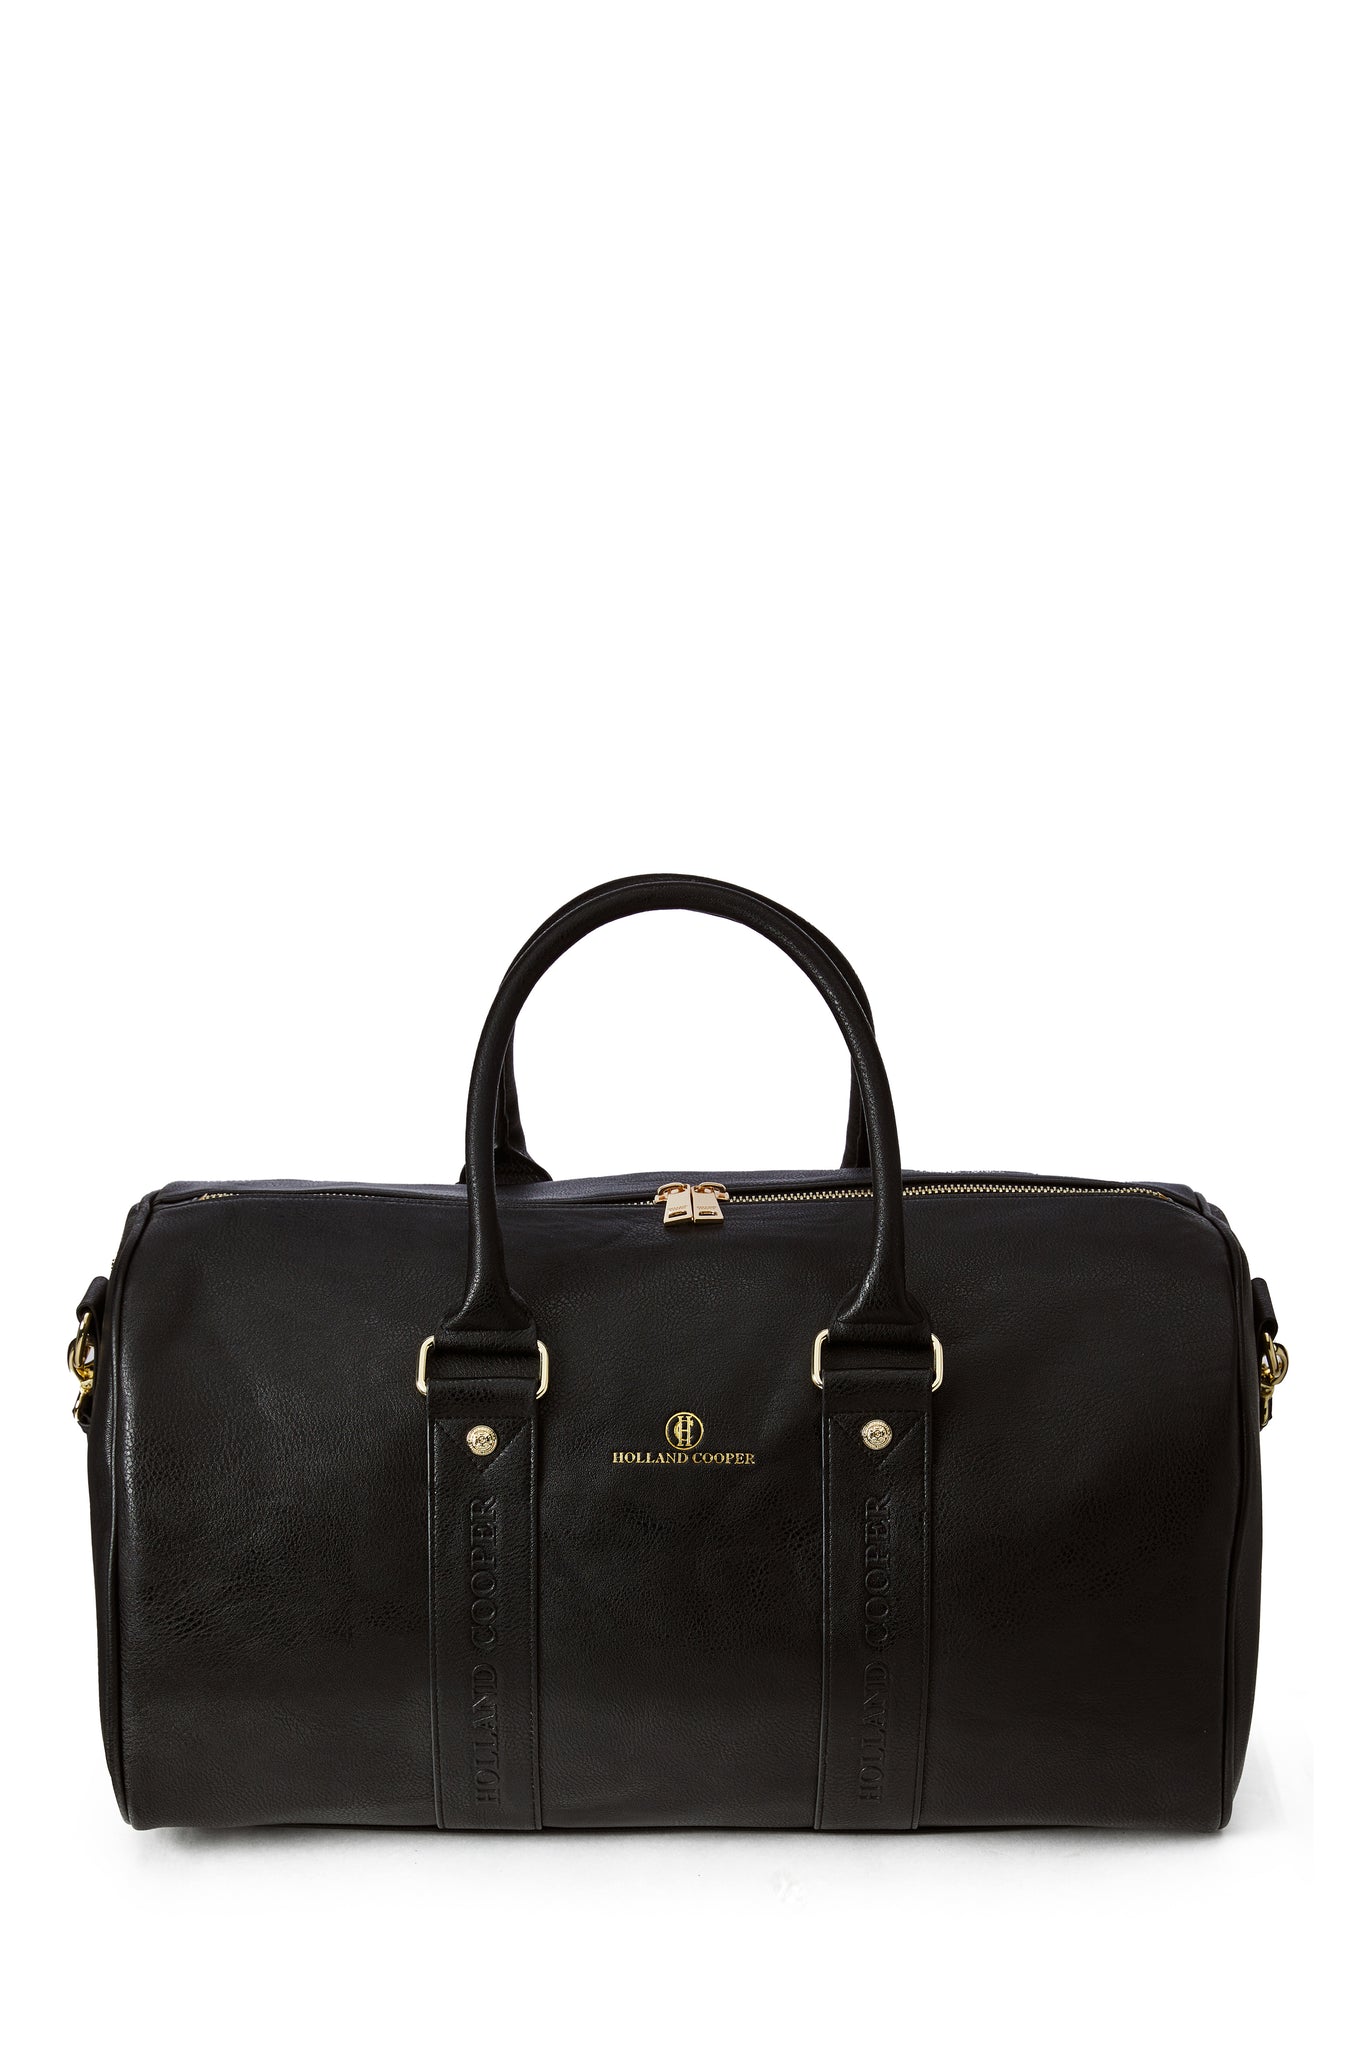 womens black faux leather travel holdall bag with black faux leather handles and gold hardware details and zip